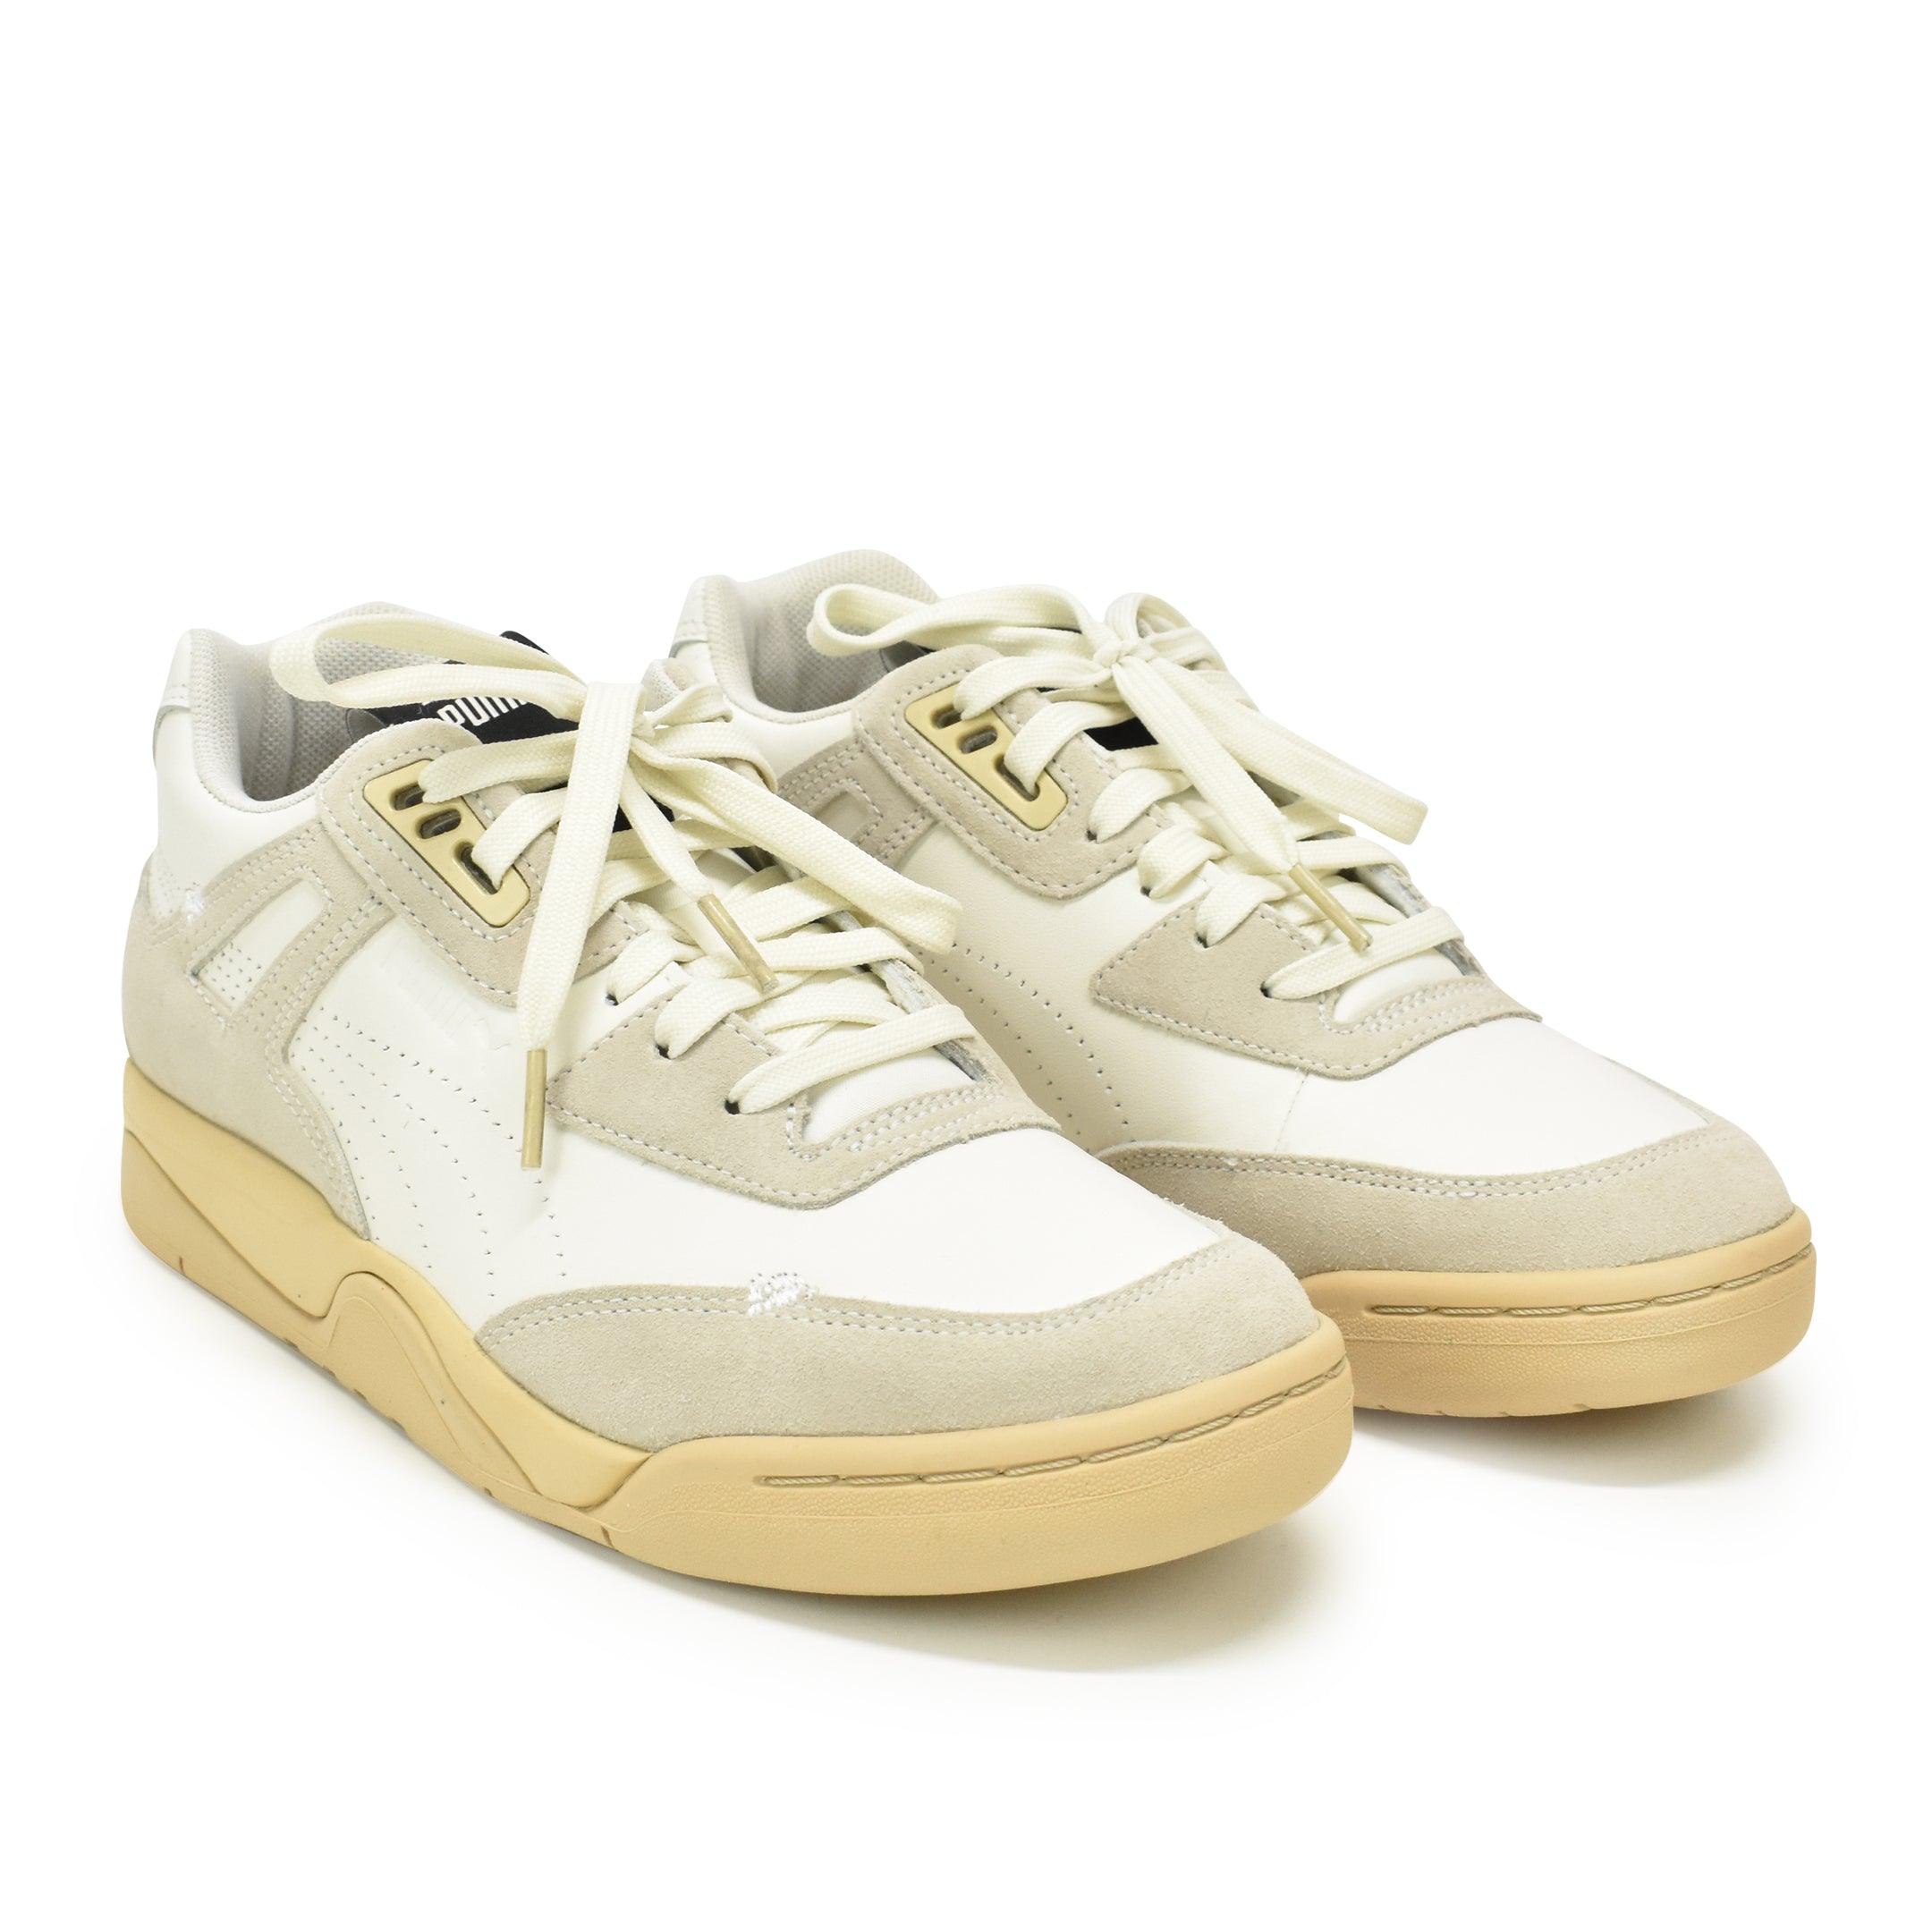 Puma x Rhude Sneakers - Men's 8 - Fashionably Yours